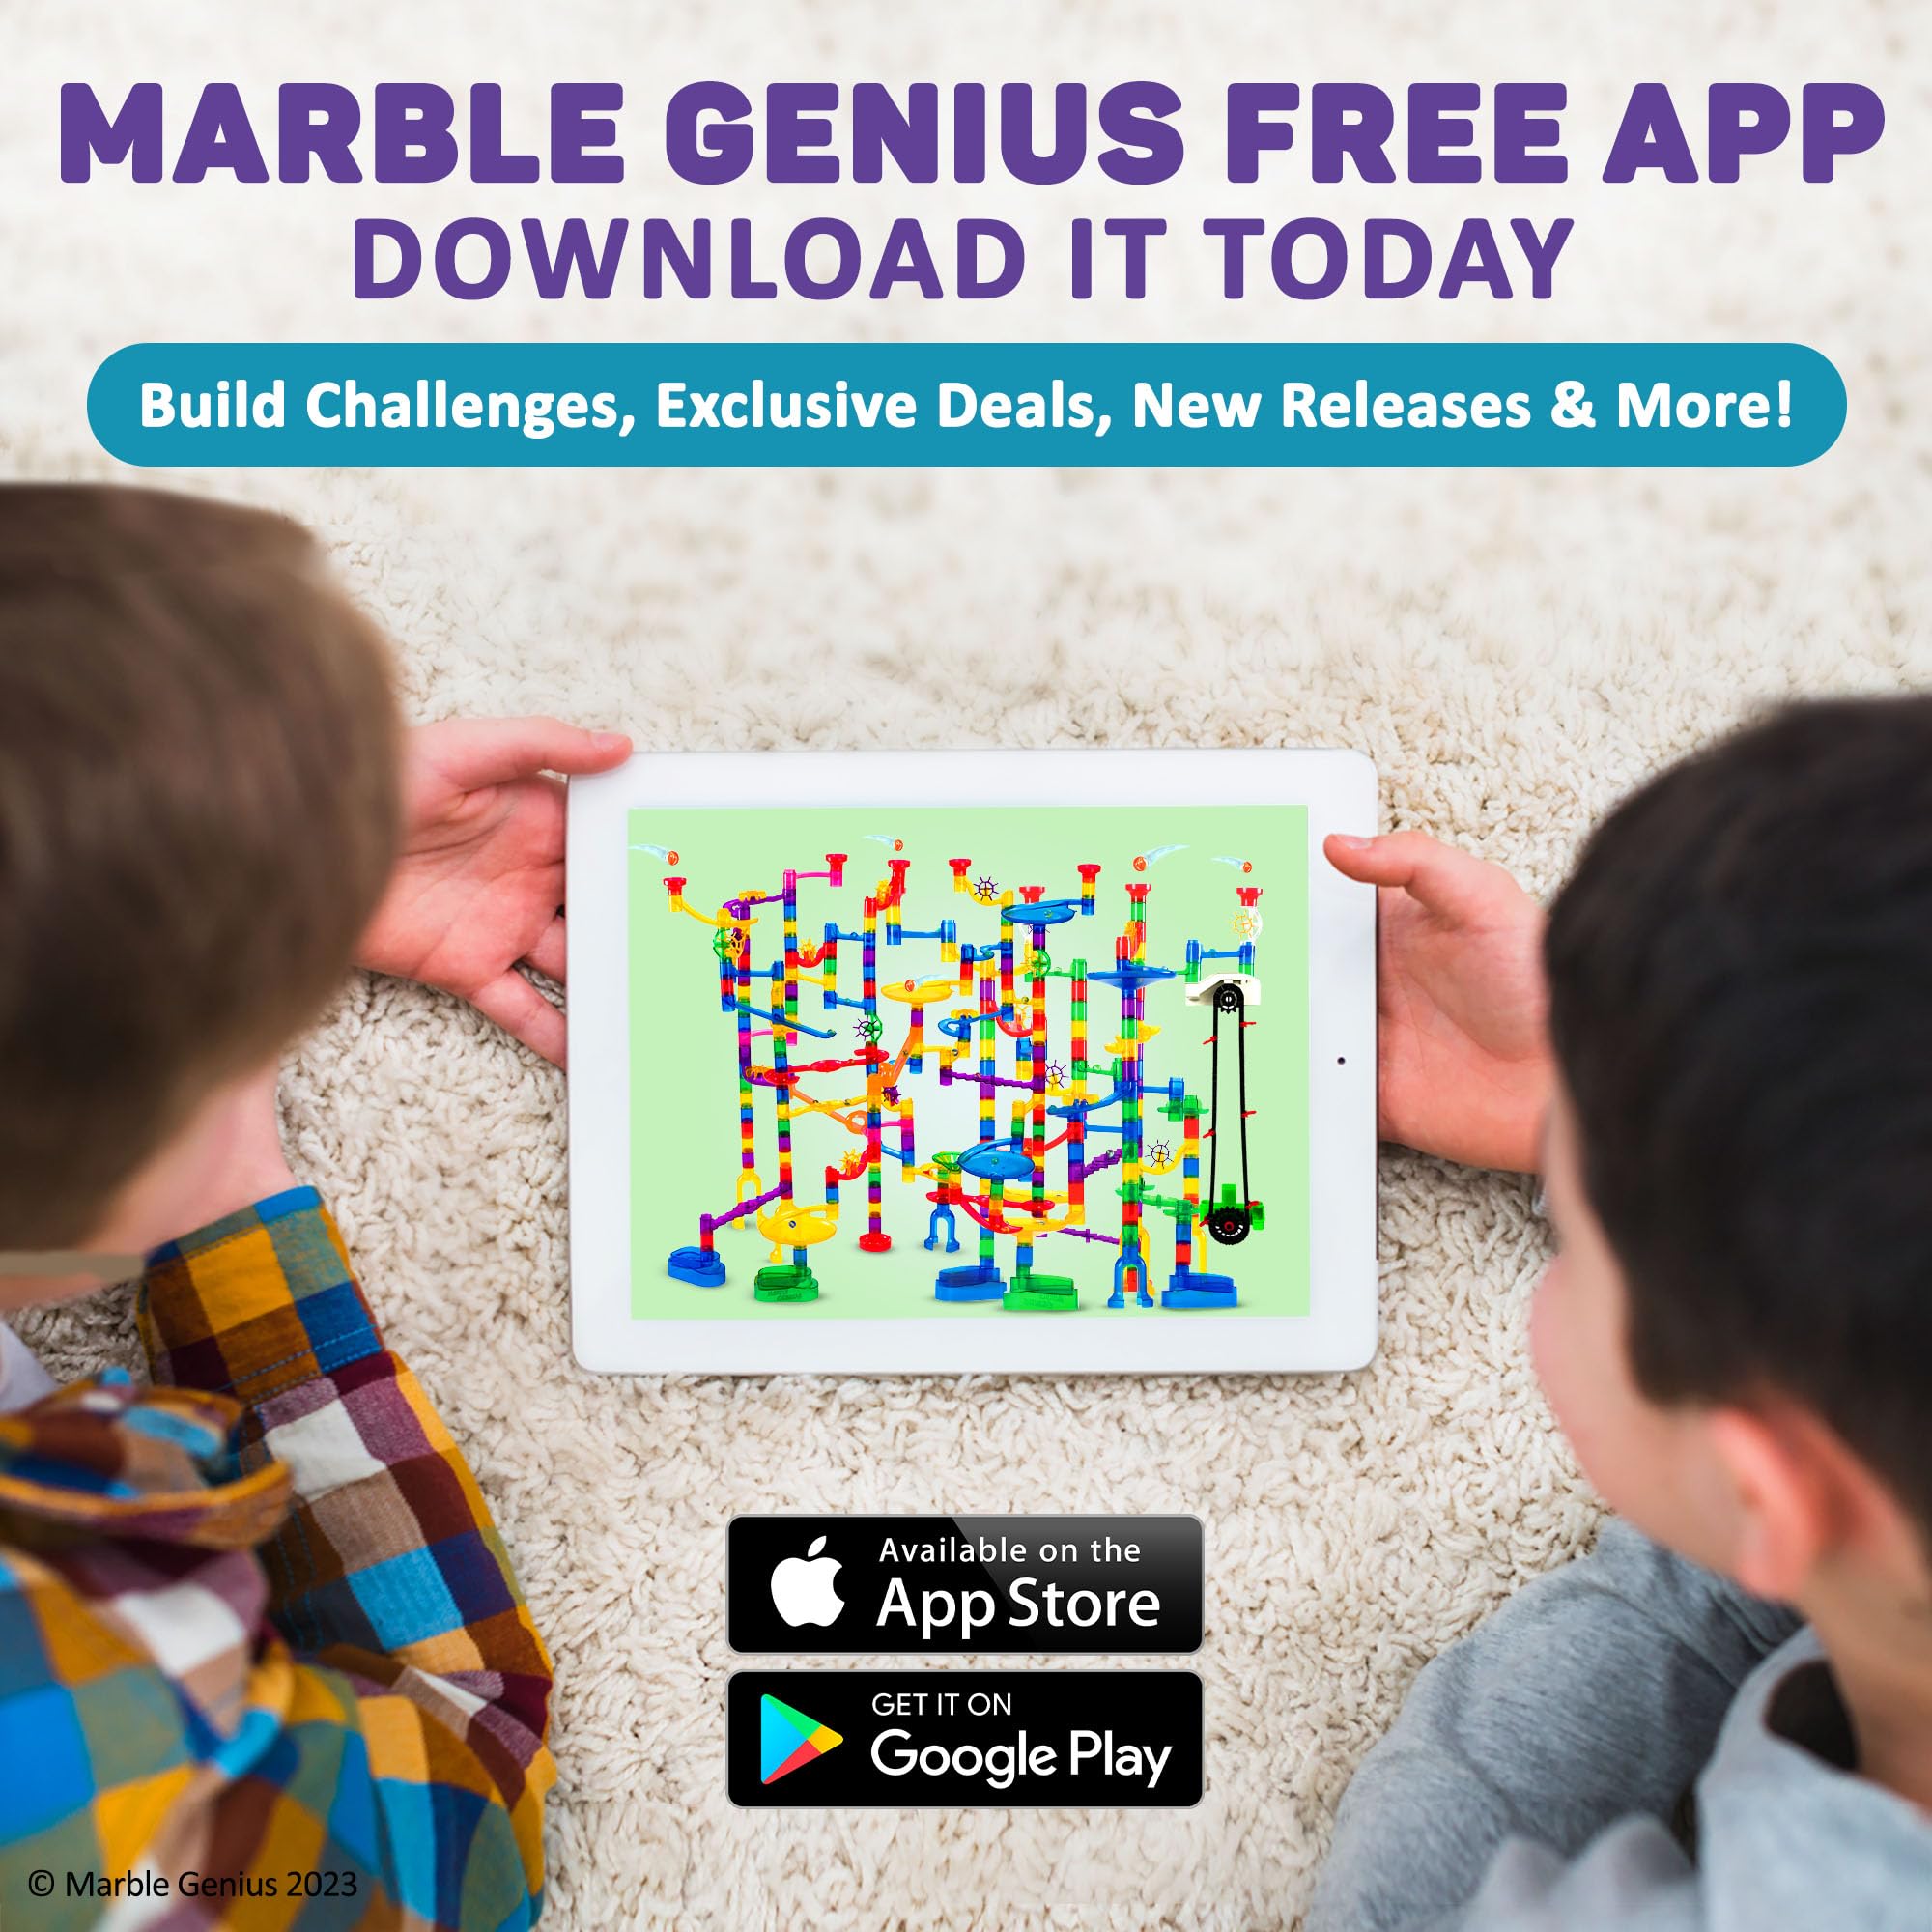 Marble Genius Bundle: Super Set (150 Pieces), Automatic Chain Lift, Primary Booster Set (20 Pieces), and Stable Bases (4 Pieces), Perfect for Kids and Adult Alike